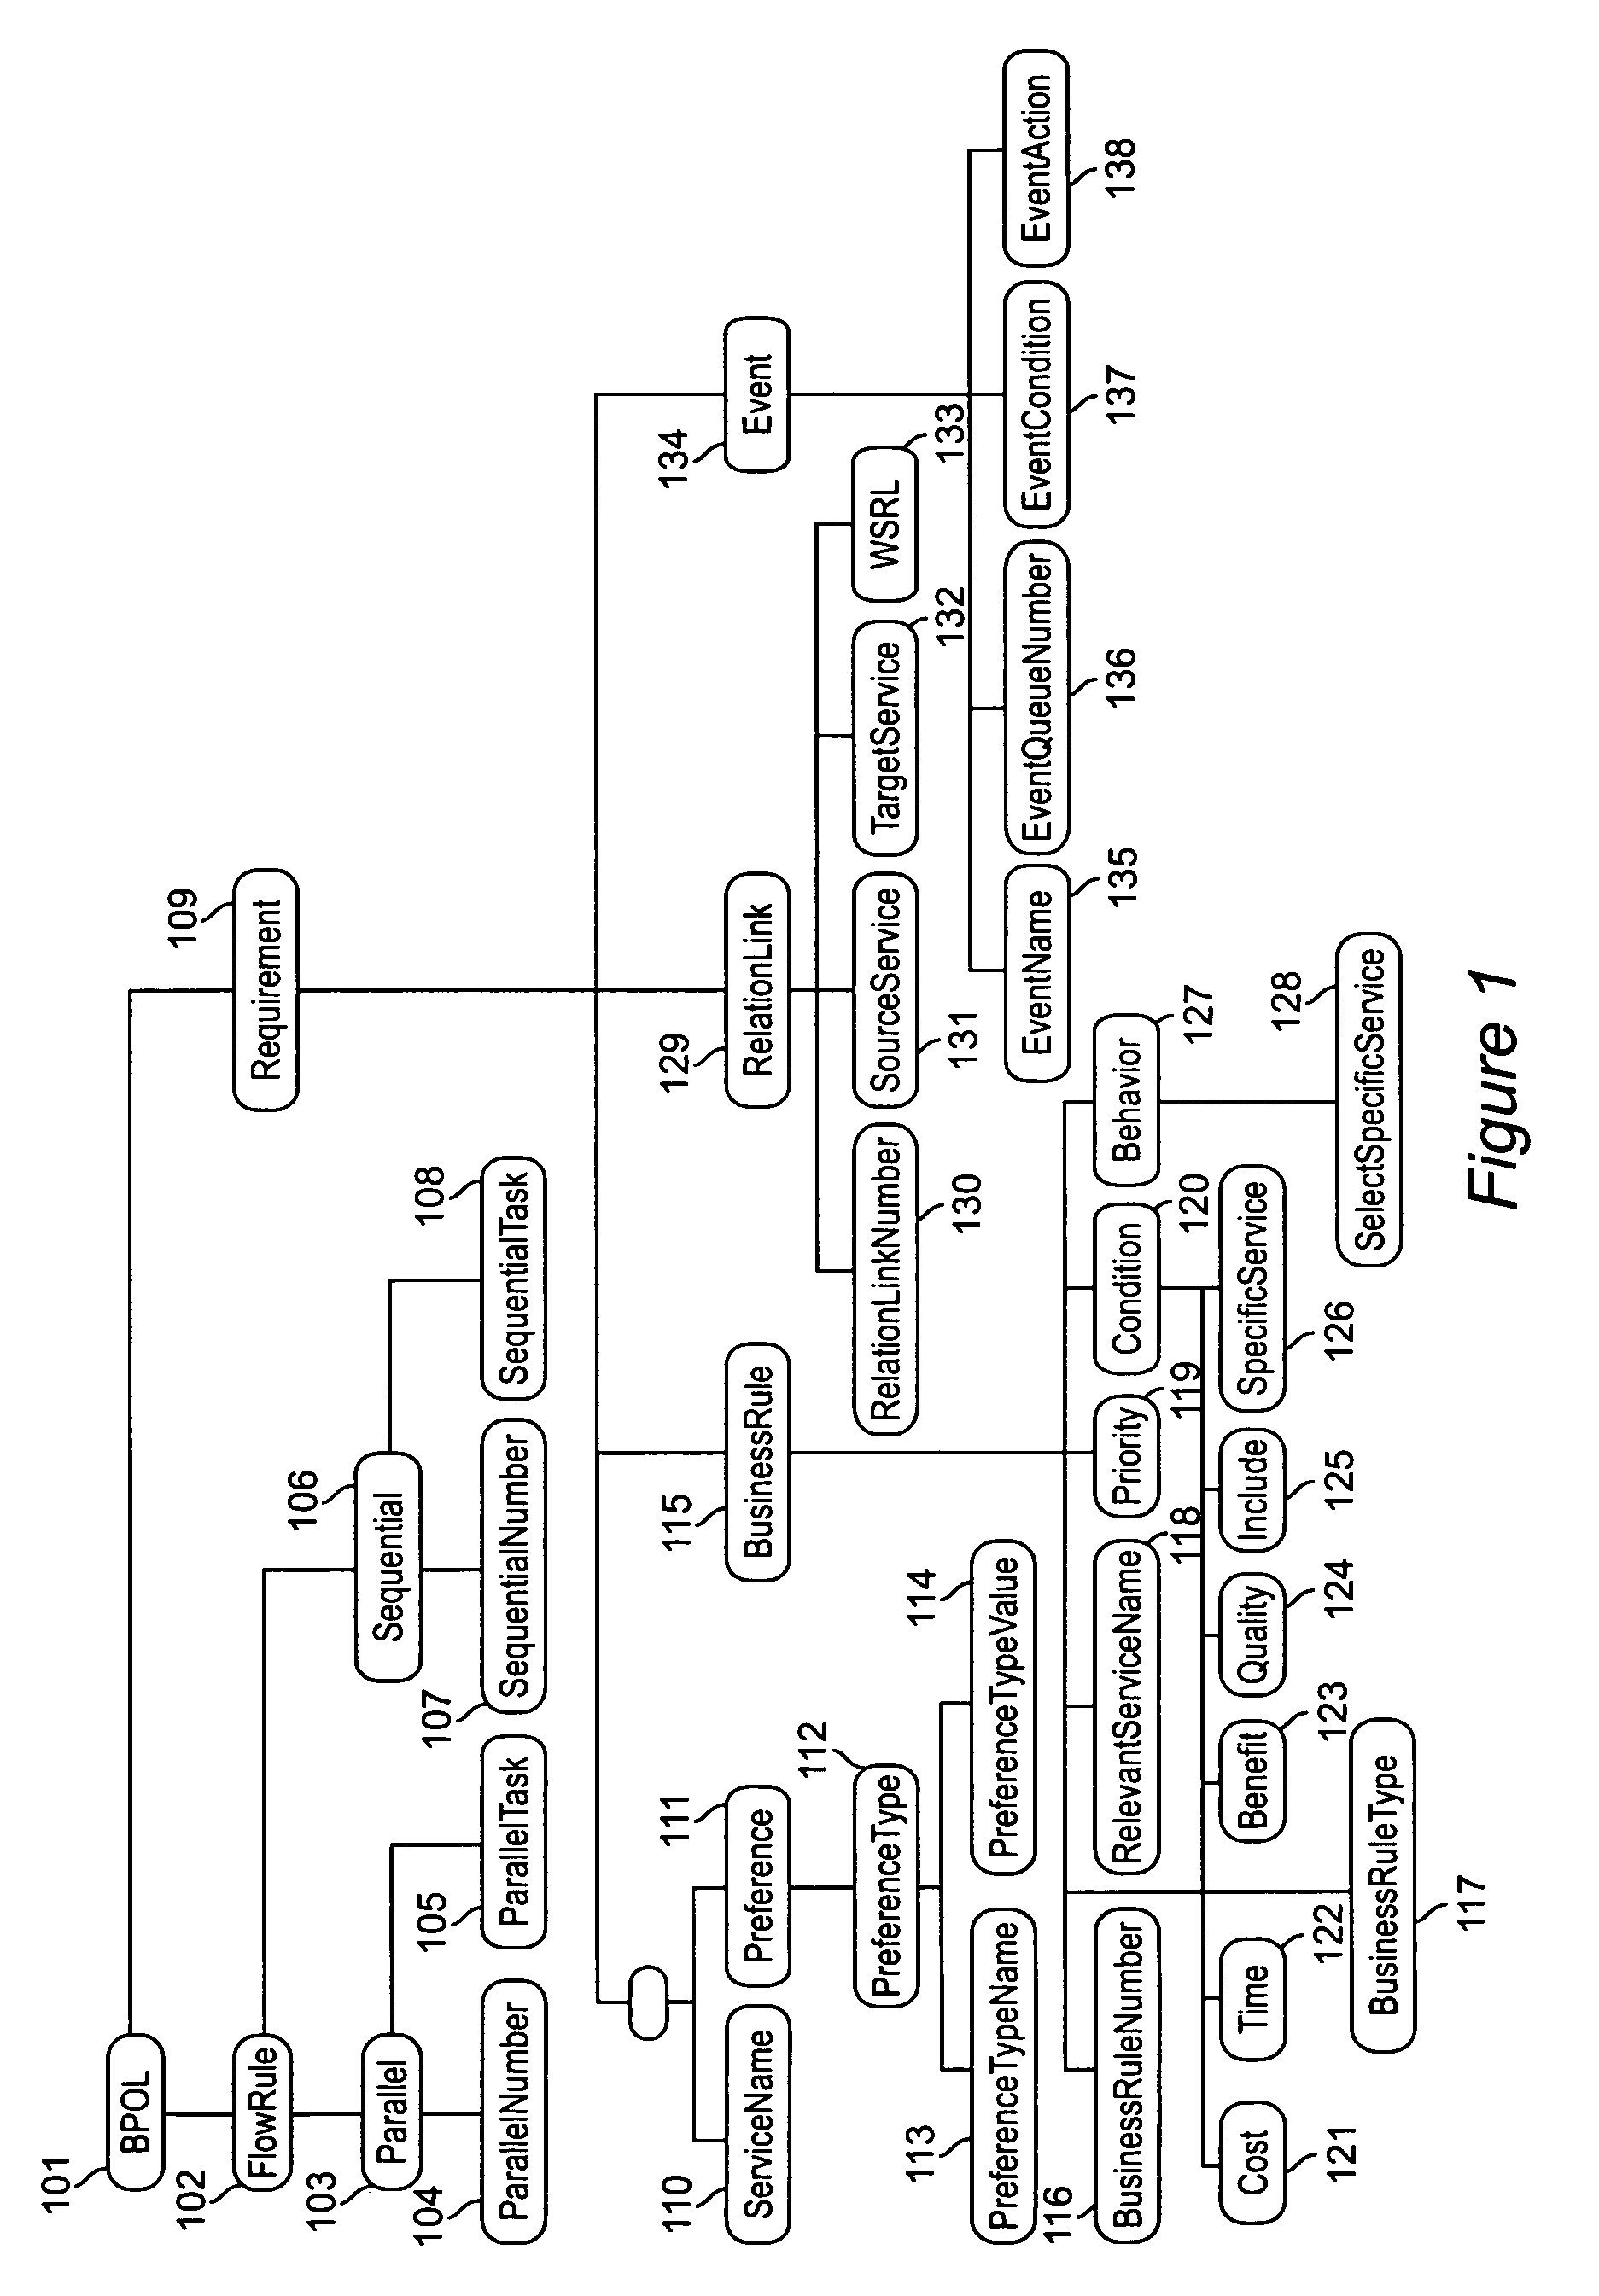 System and method of dynamic service composition for business process outsourcing